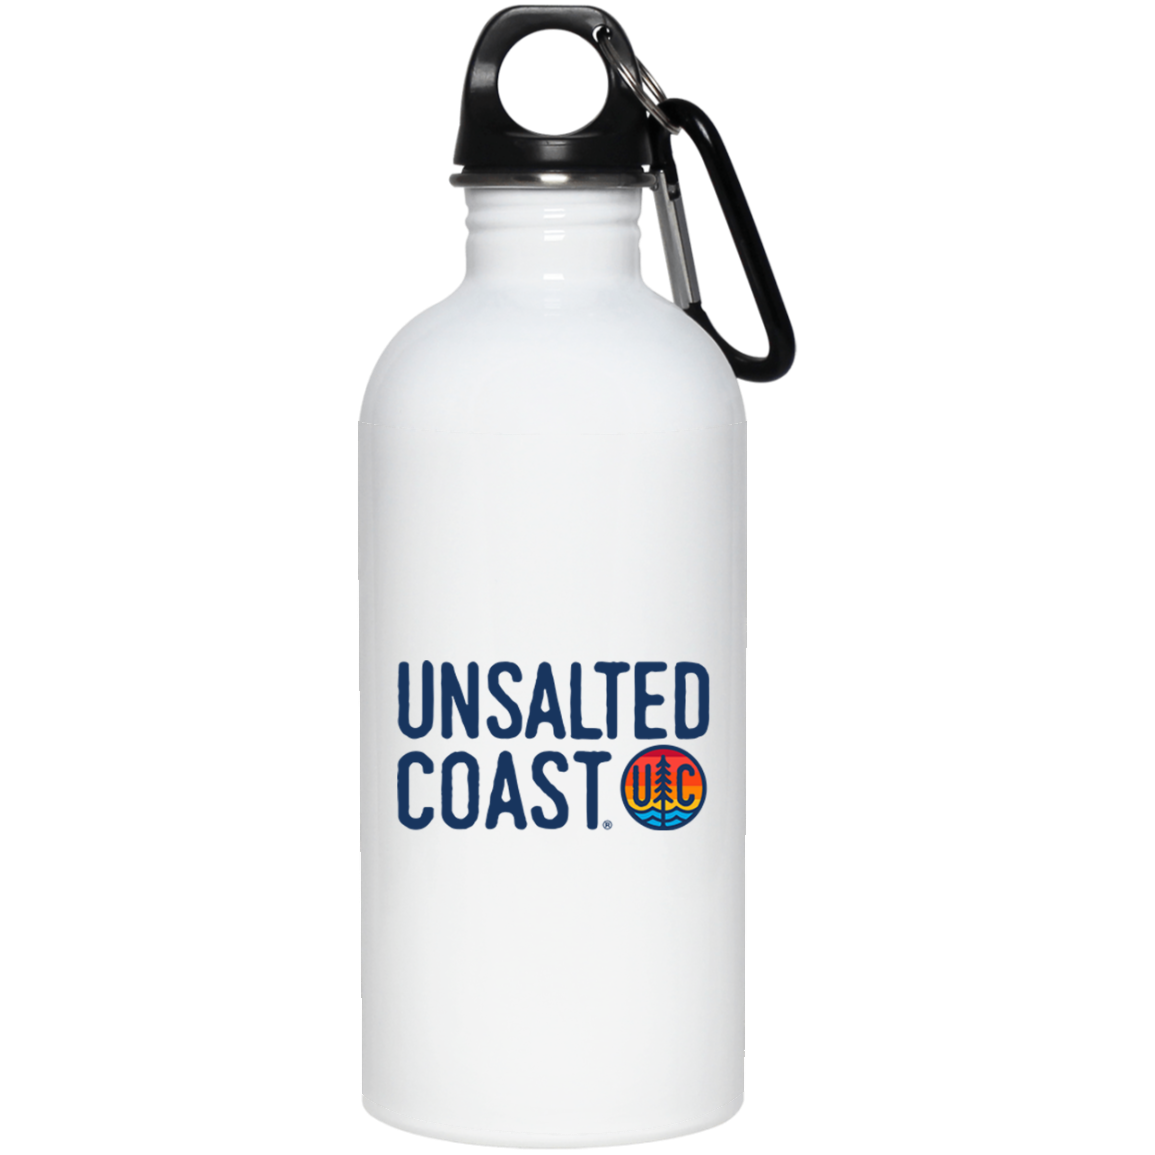 Primary Logo 20 oz. Stainless Steel Water Bottle